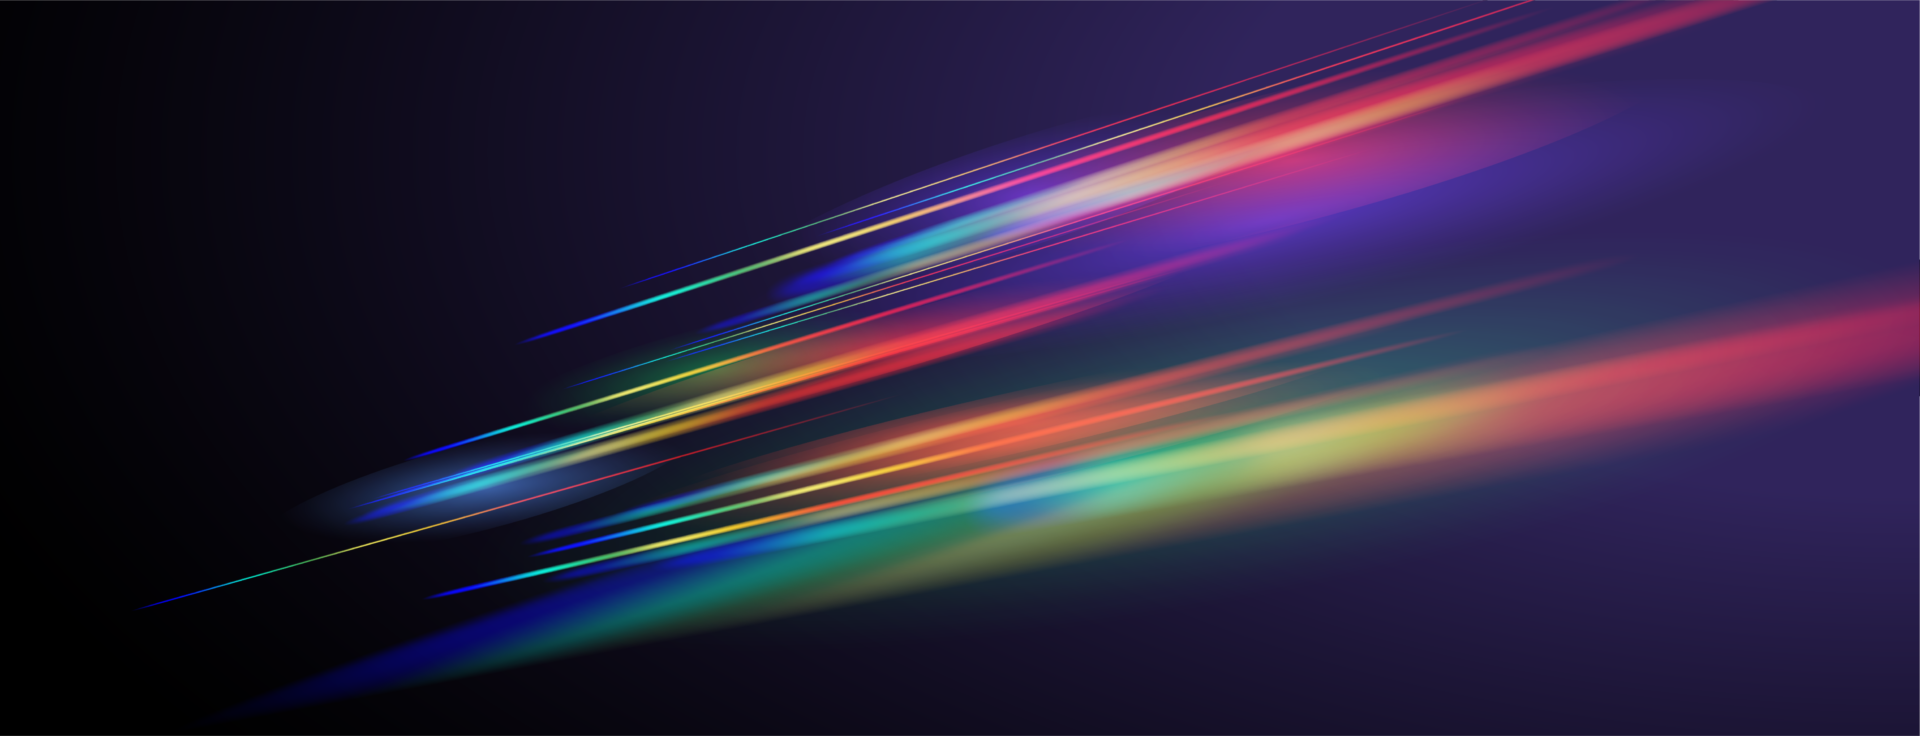 Colorful streaks of light against a dark background